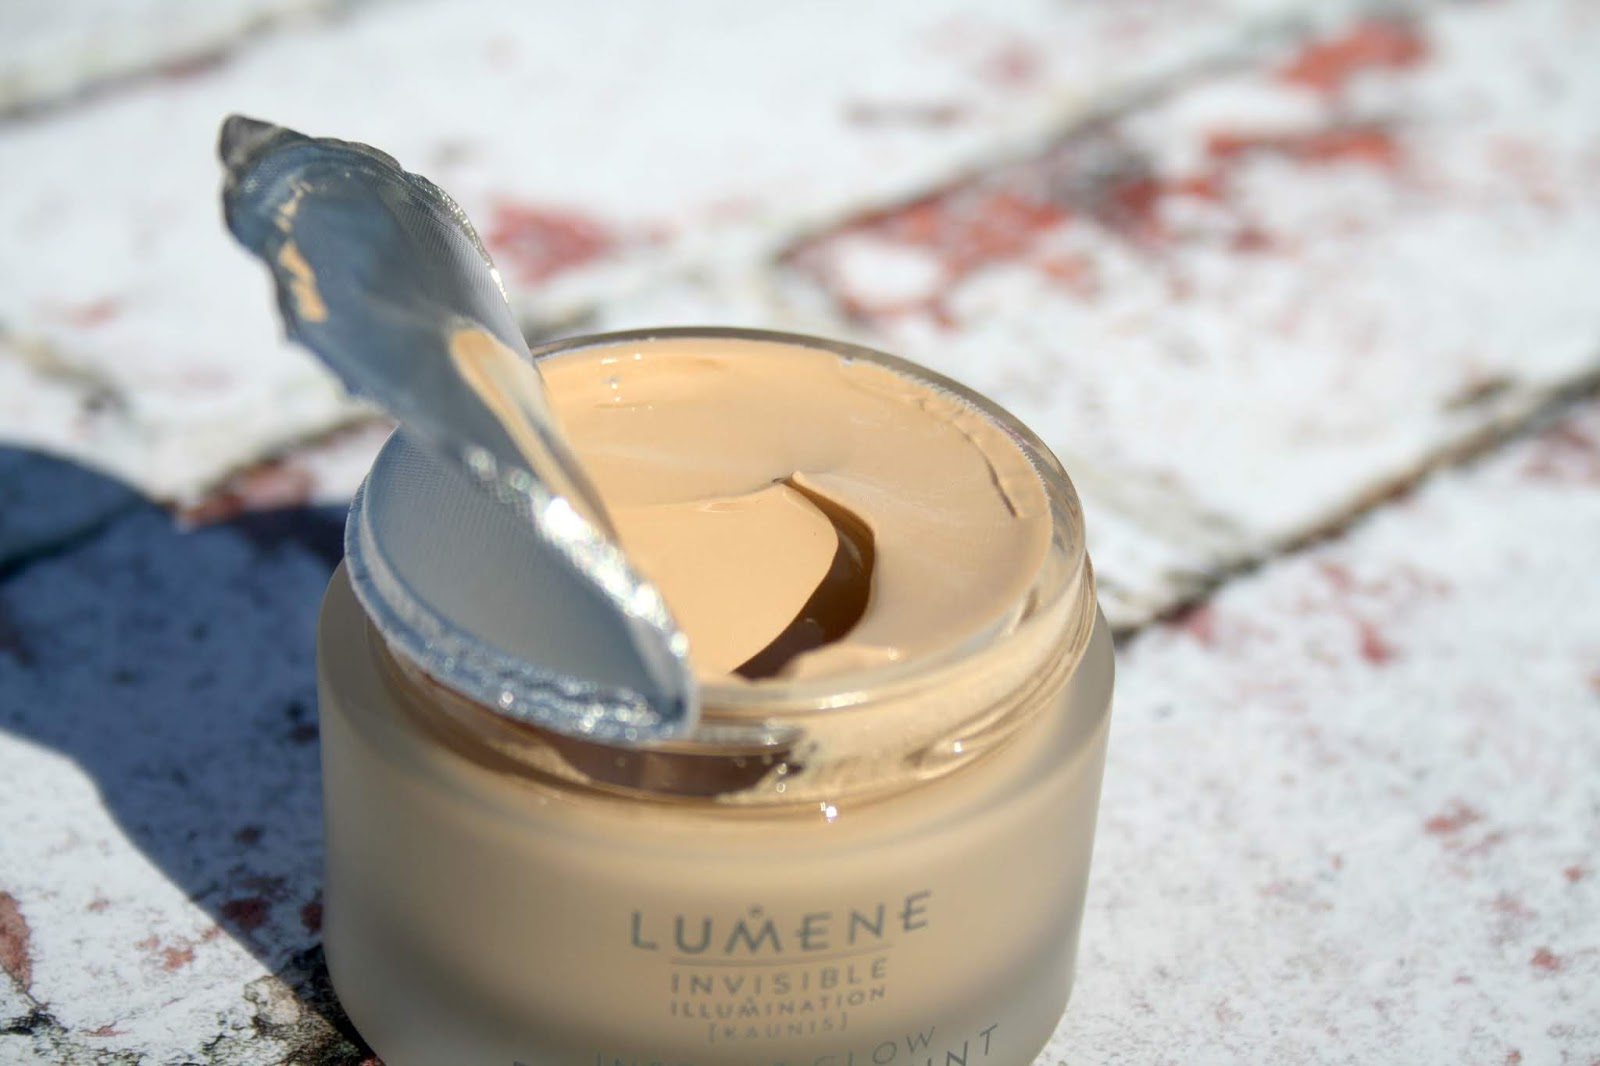 Beautyqueenuk | A UK Beauty Lifestyle Blog: Lumene Nordic Skincare Review and Swatches